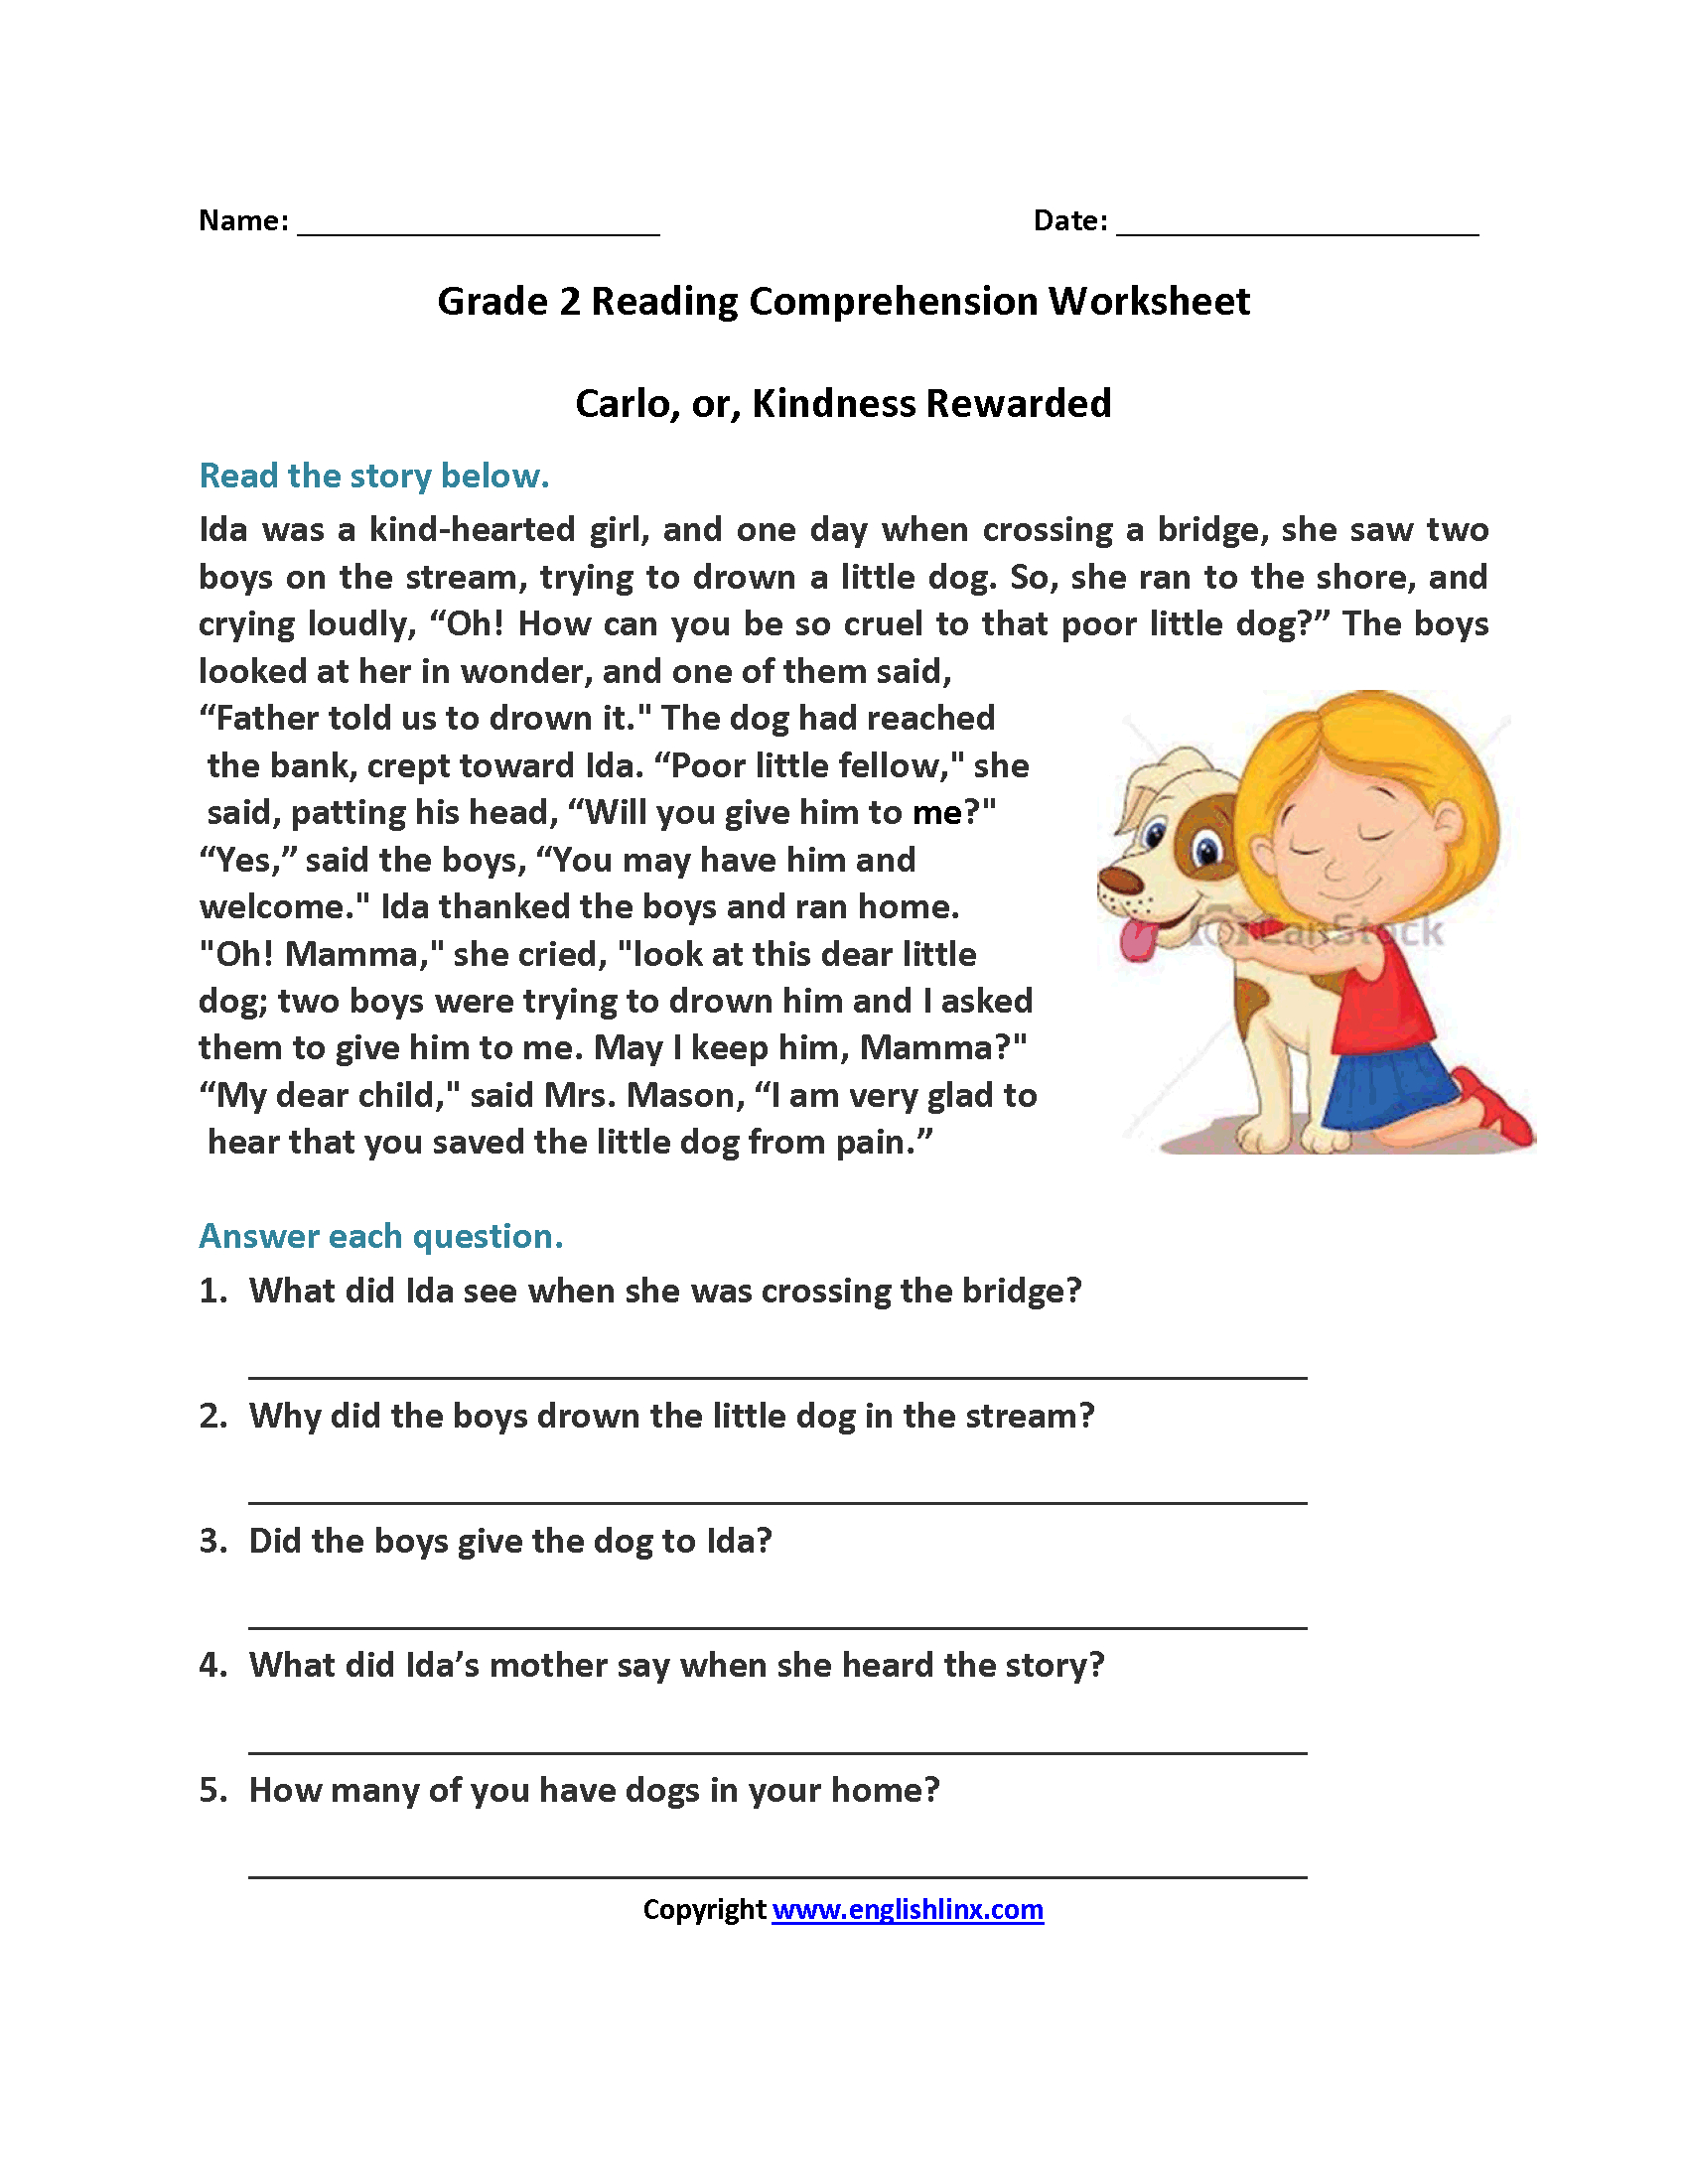 Carlo Or Kindness Rewarded Second Grade Reading Worksheets | Reading - Free Printable Reading Passages For 3Rd Grade